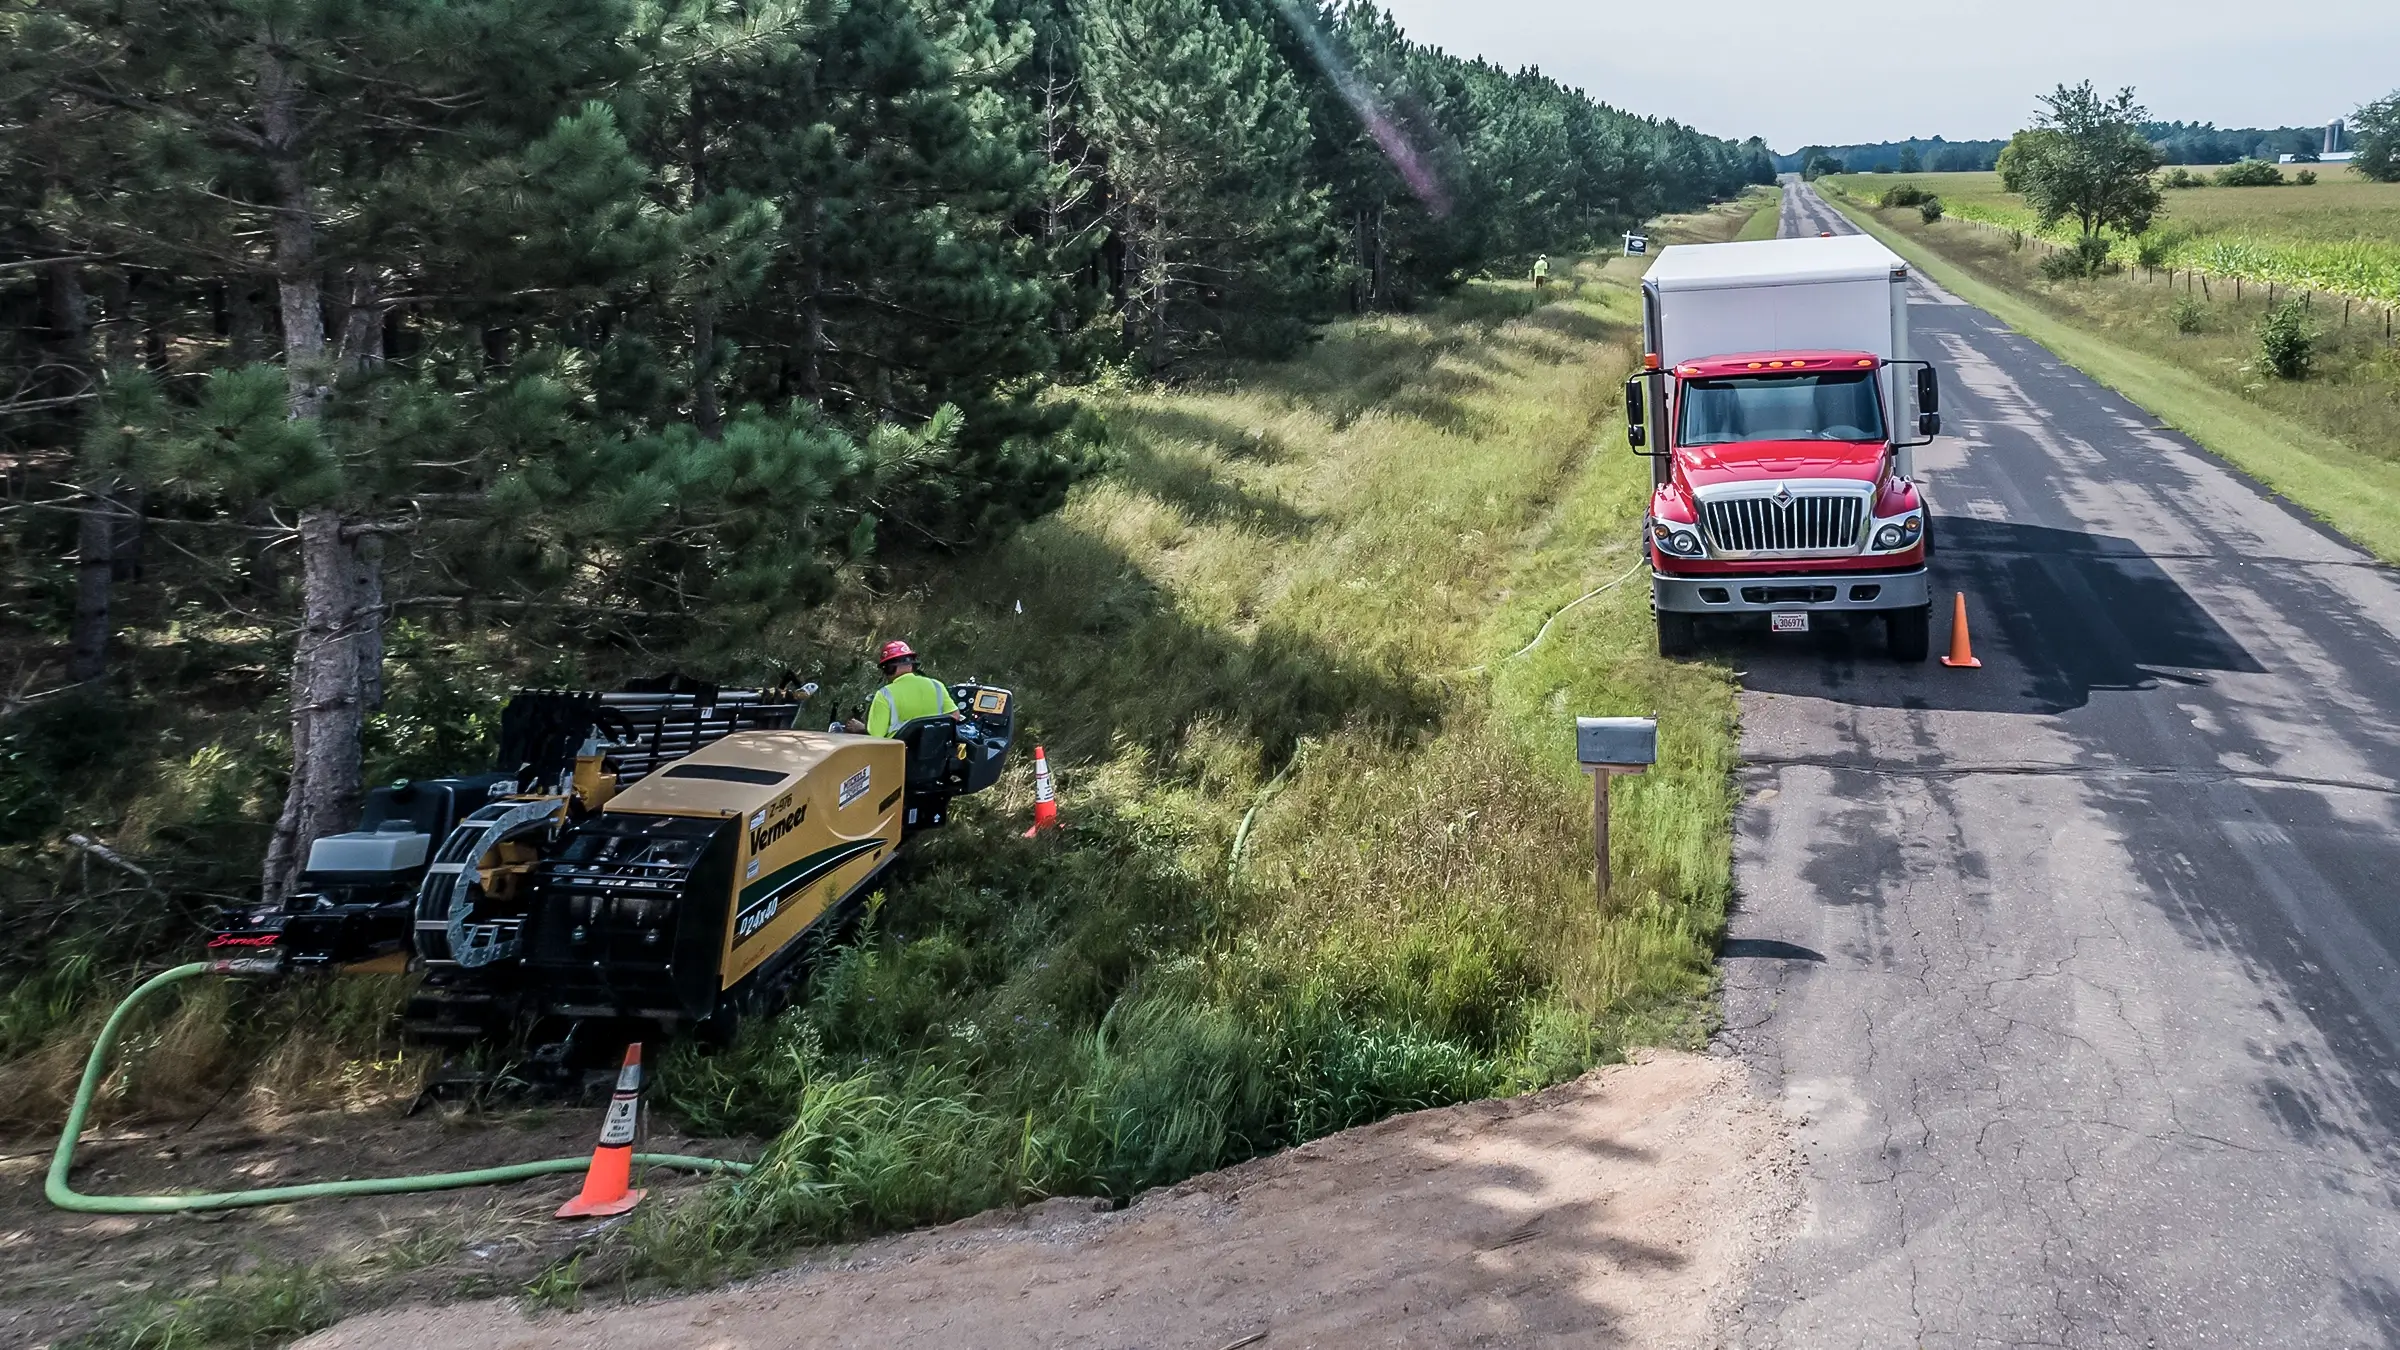 A small HDD rig and box truck work near a rural Wisconsin road.